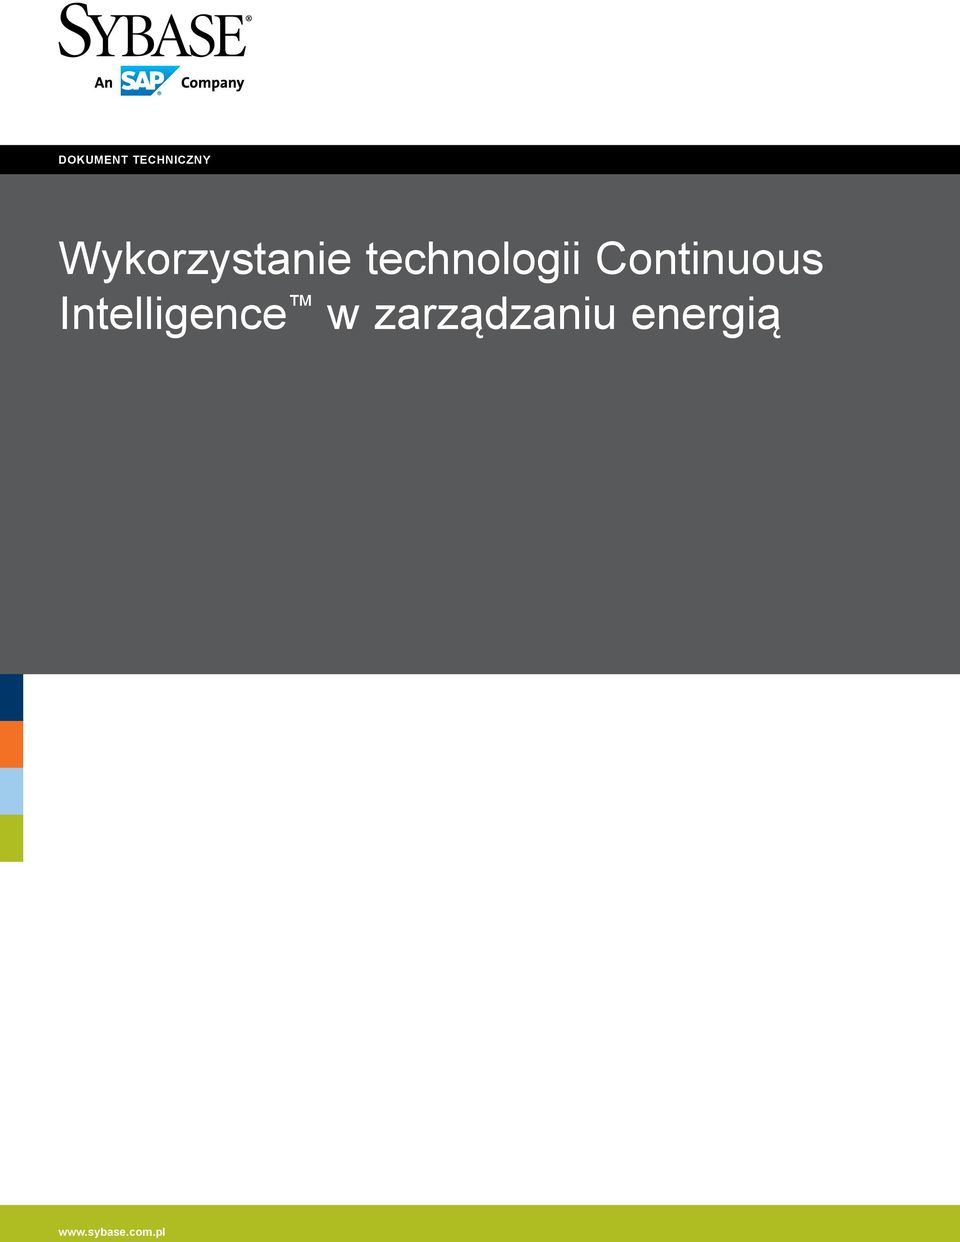 Continuous Intelligence w